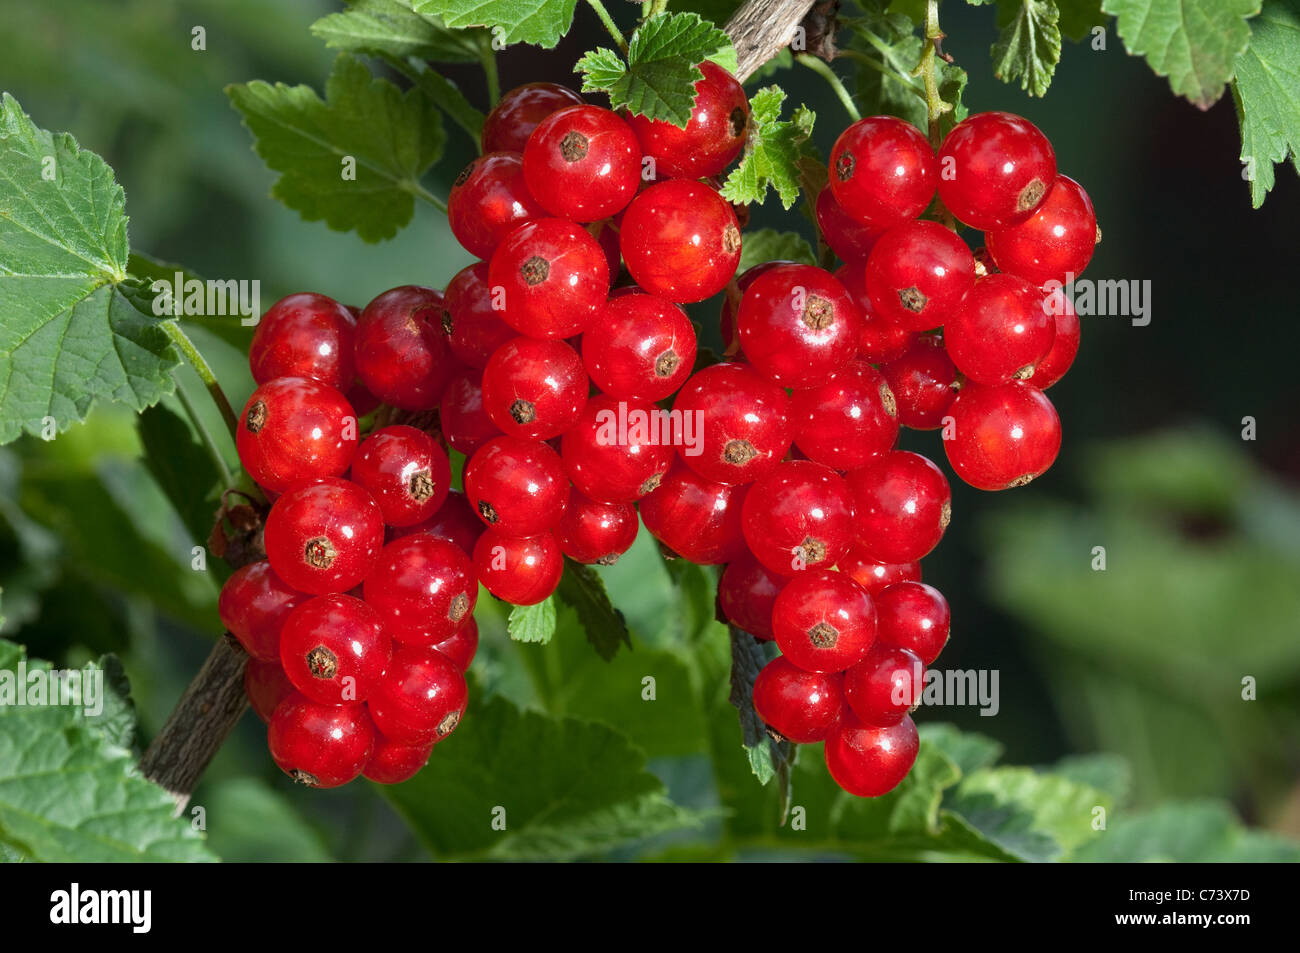 Redcurrant, Red Currant (Ribes rubrum), ripe berries on a bush. Stock Photo